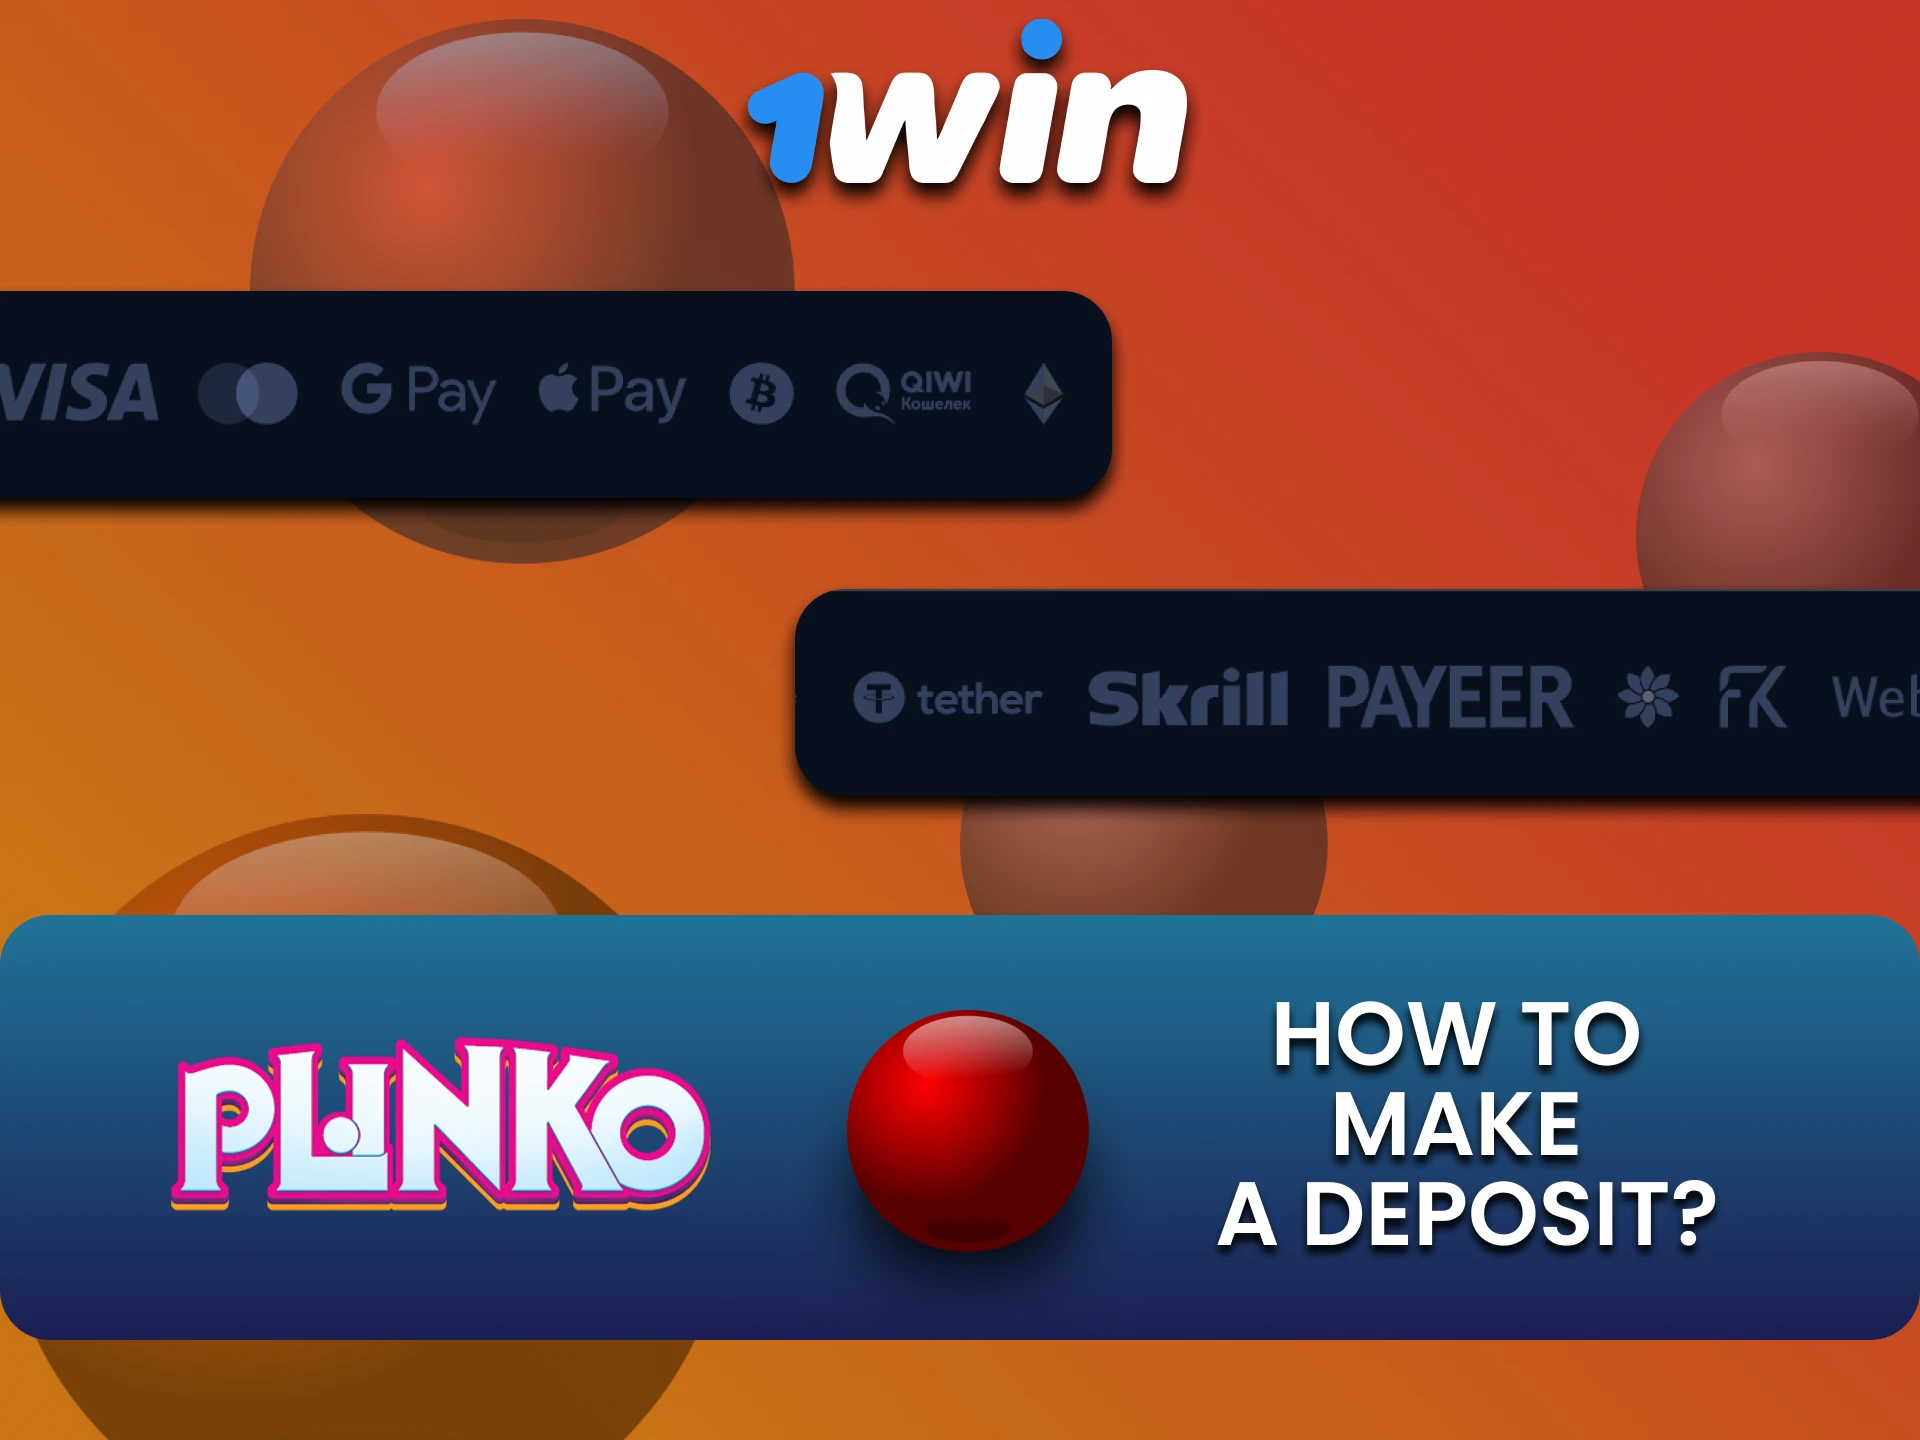 Find out about ways to top up your funds for Plinko from 1win.